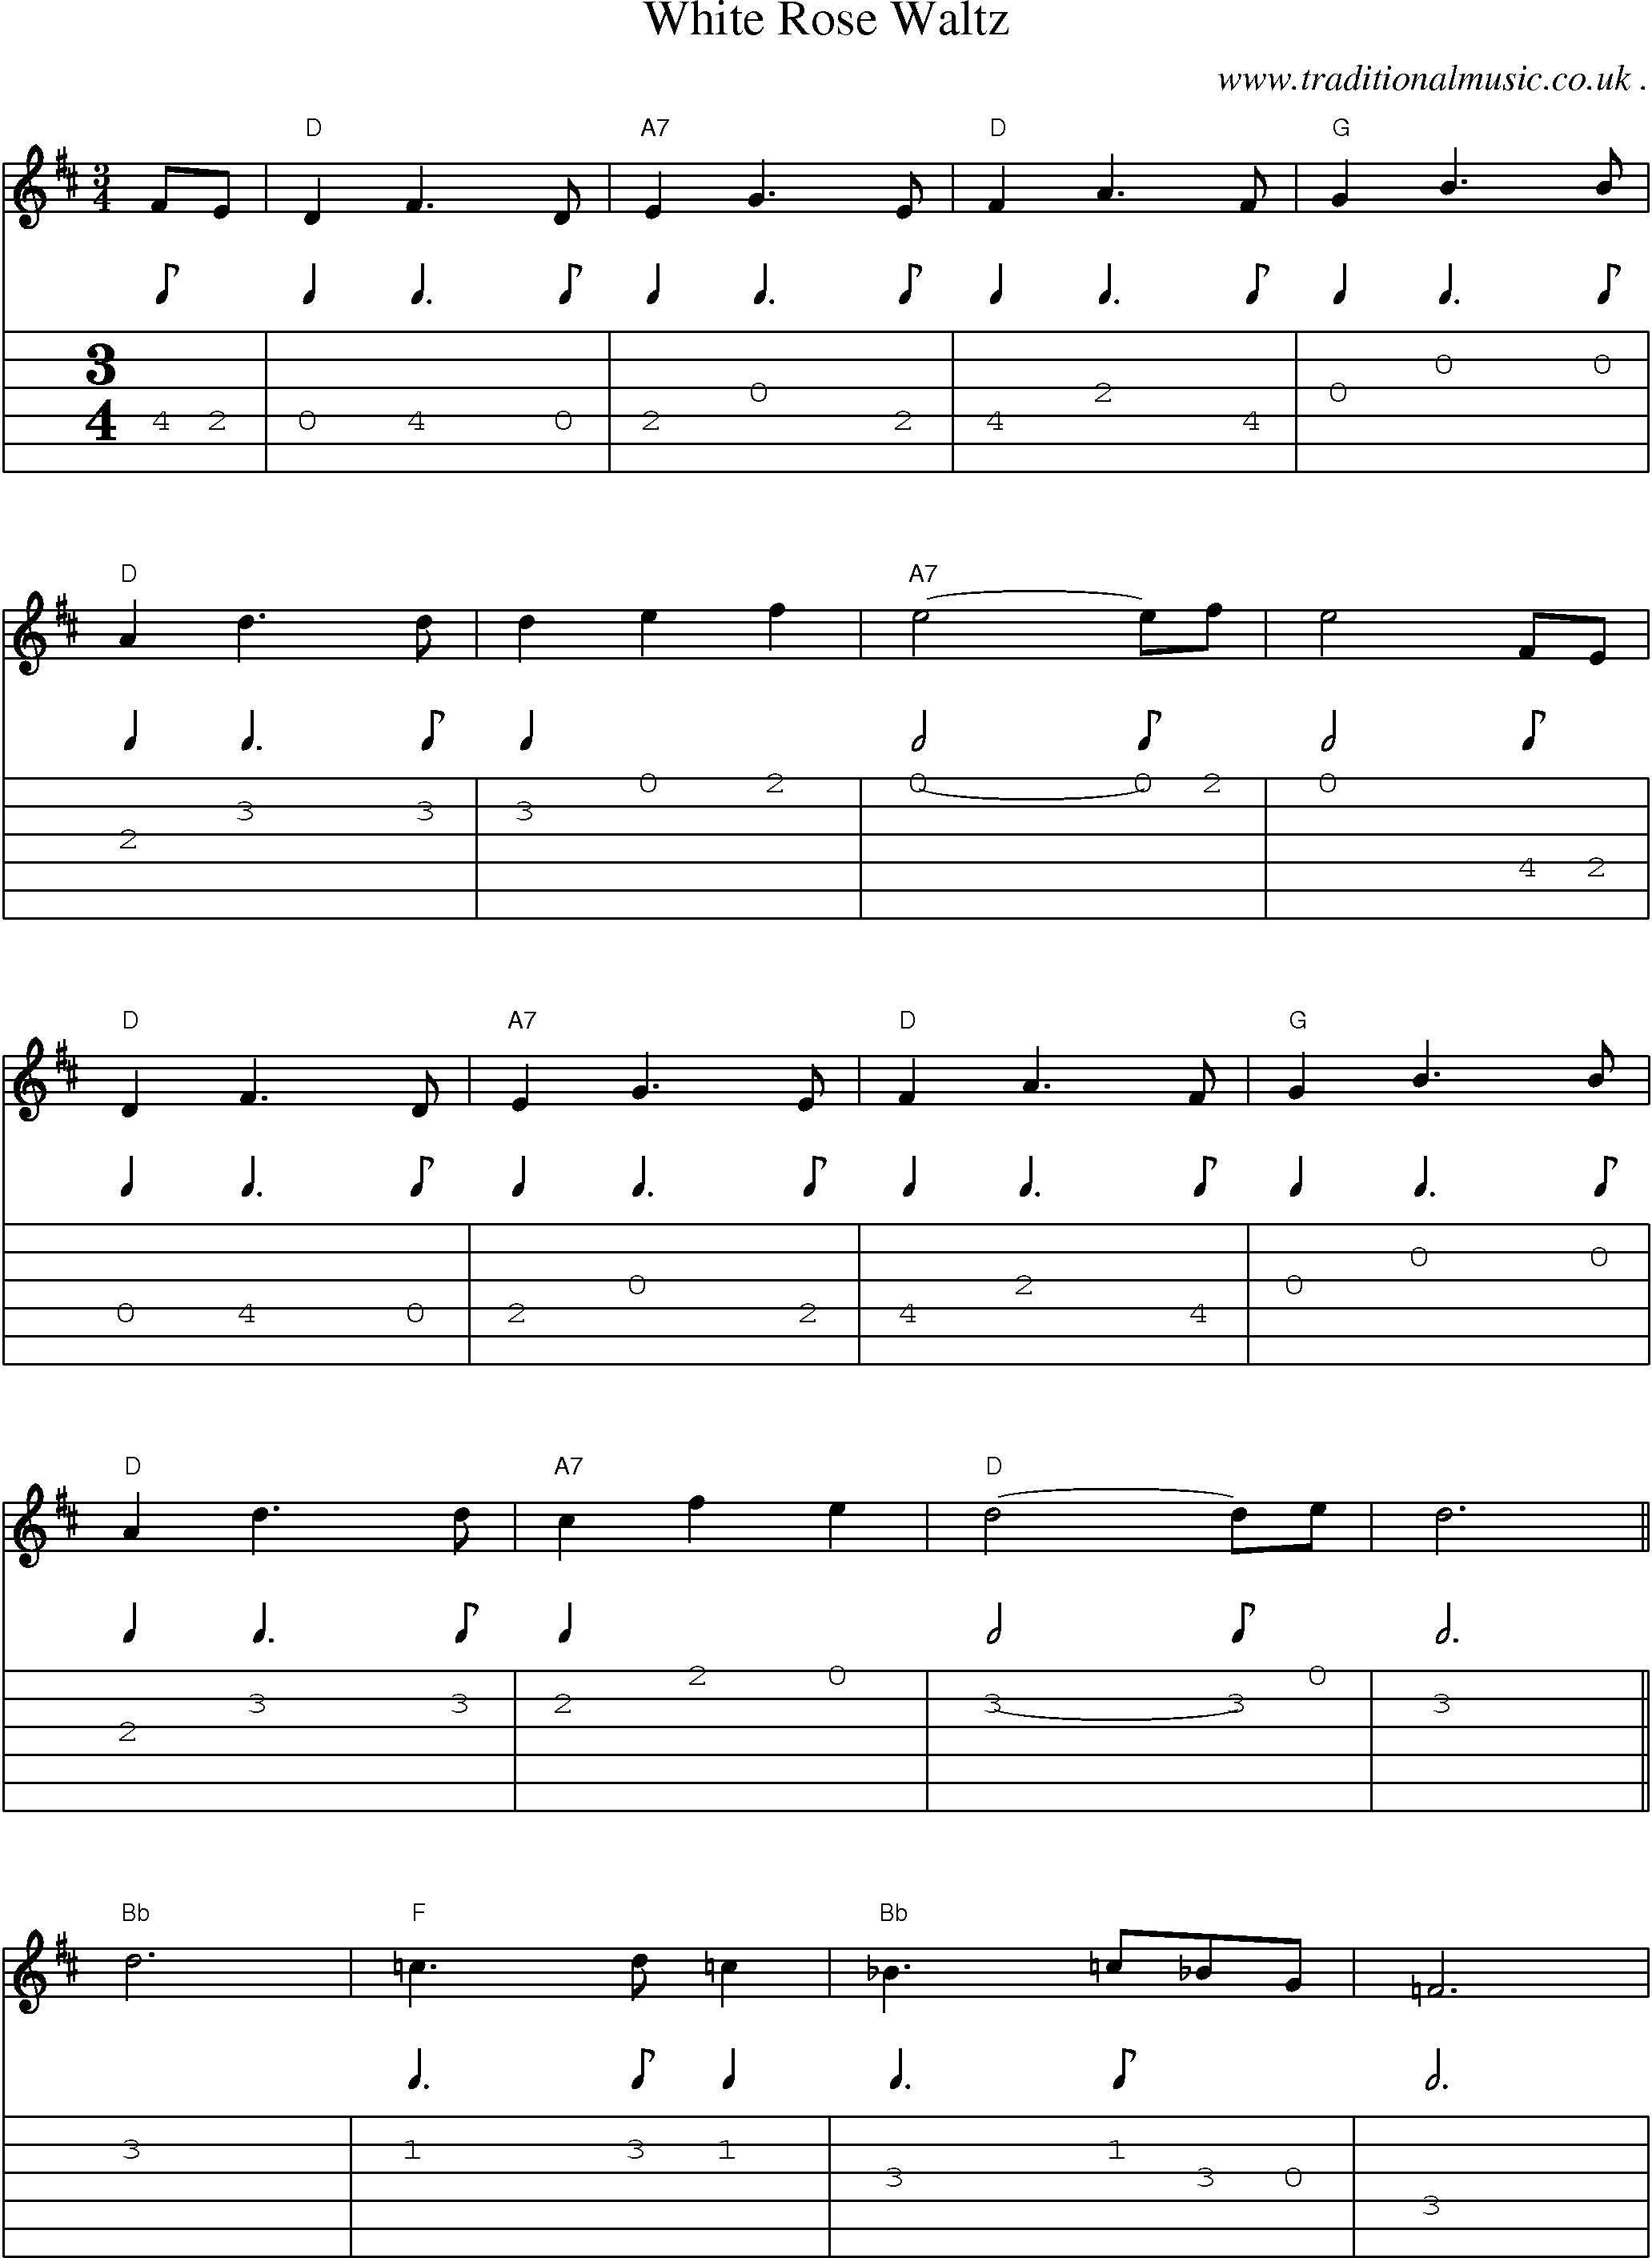 Sheet-Music and Guitar Tabs for White Rose Waltz